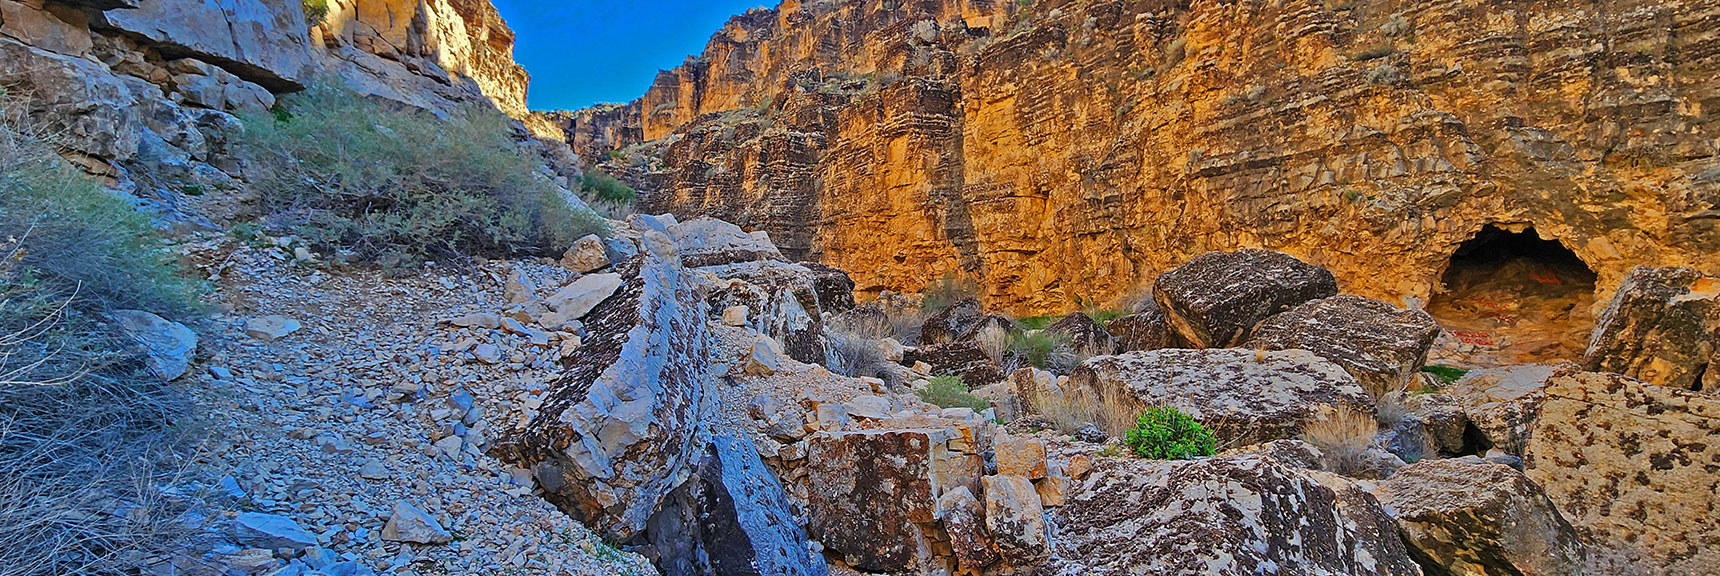 Another Cave Below the Canyon's Dry Fall Barrier. | Fossil Canyon | Cowboy Canyon | Blue Diamond Hill, Nevada